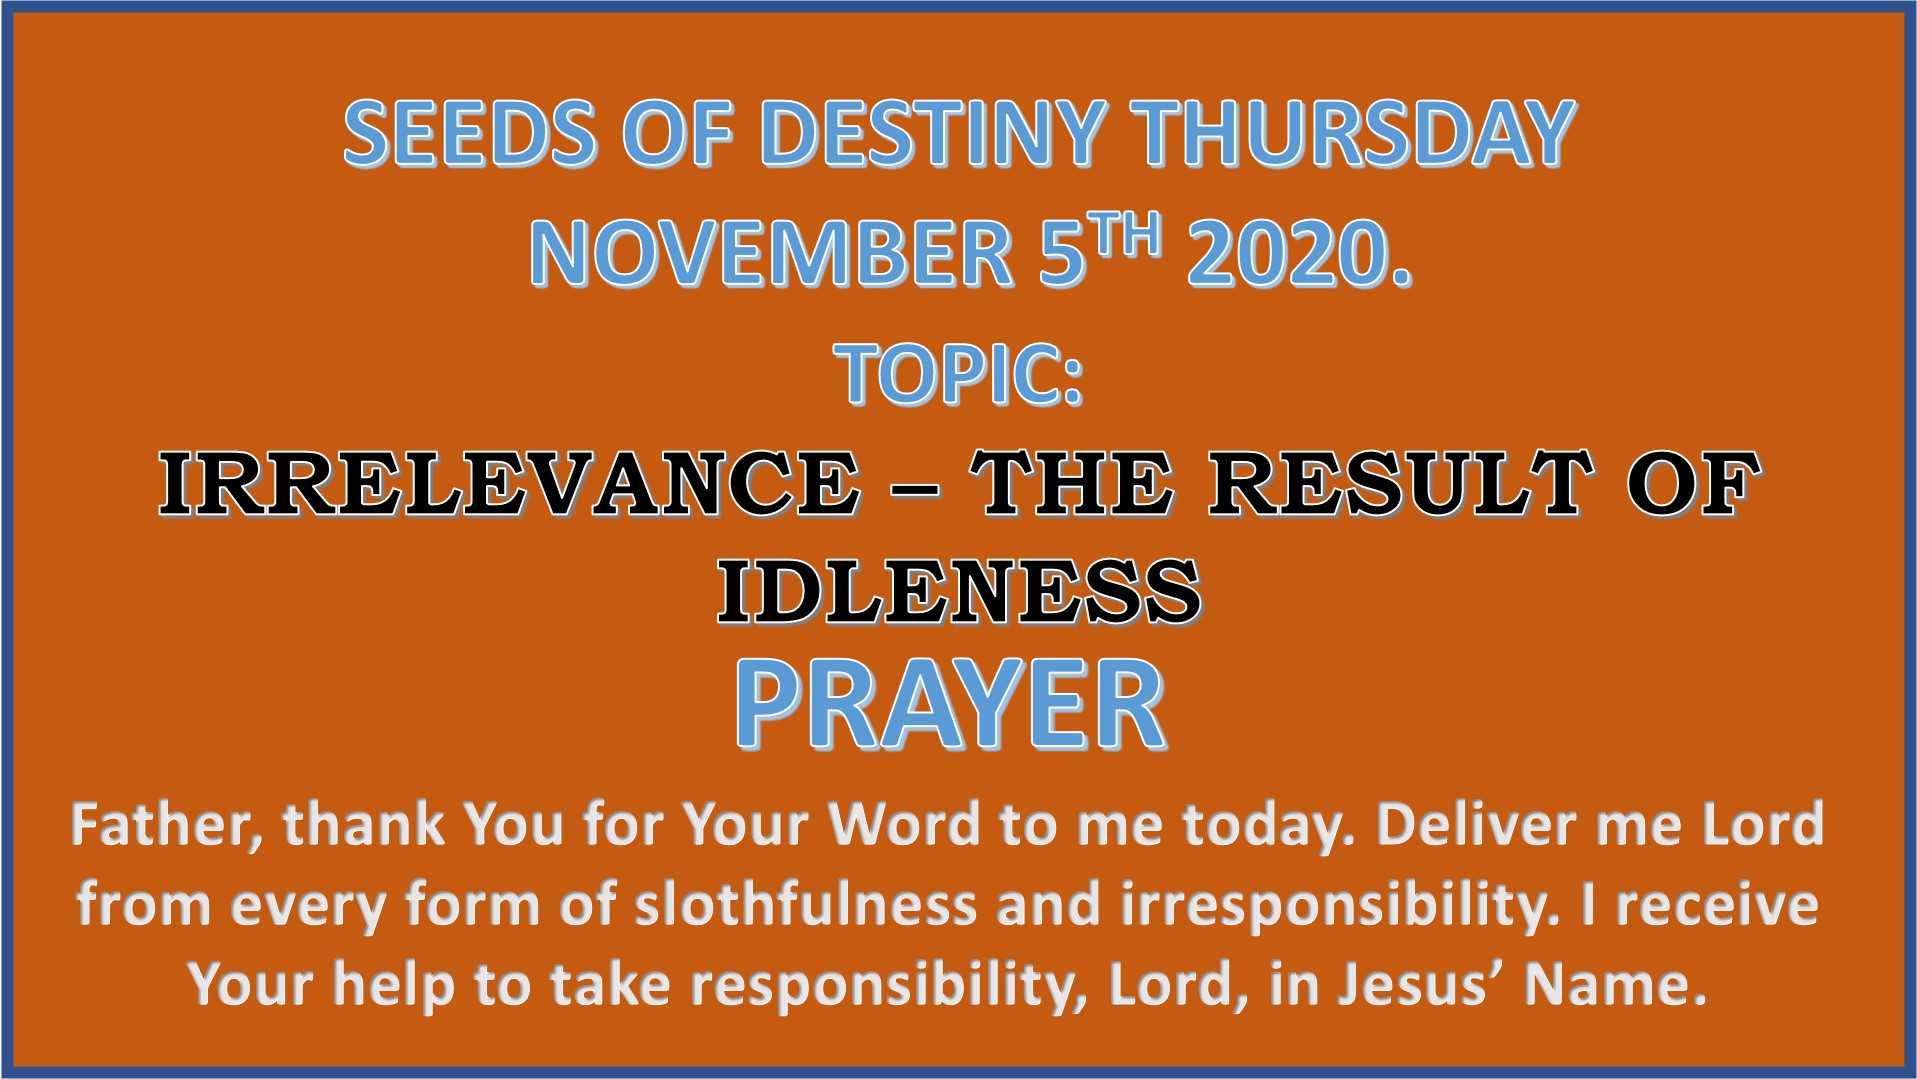 Seeds of Destiny Thursday 5th November 2020 by Dr Paul Enenche